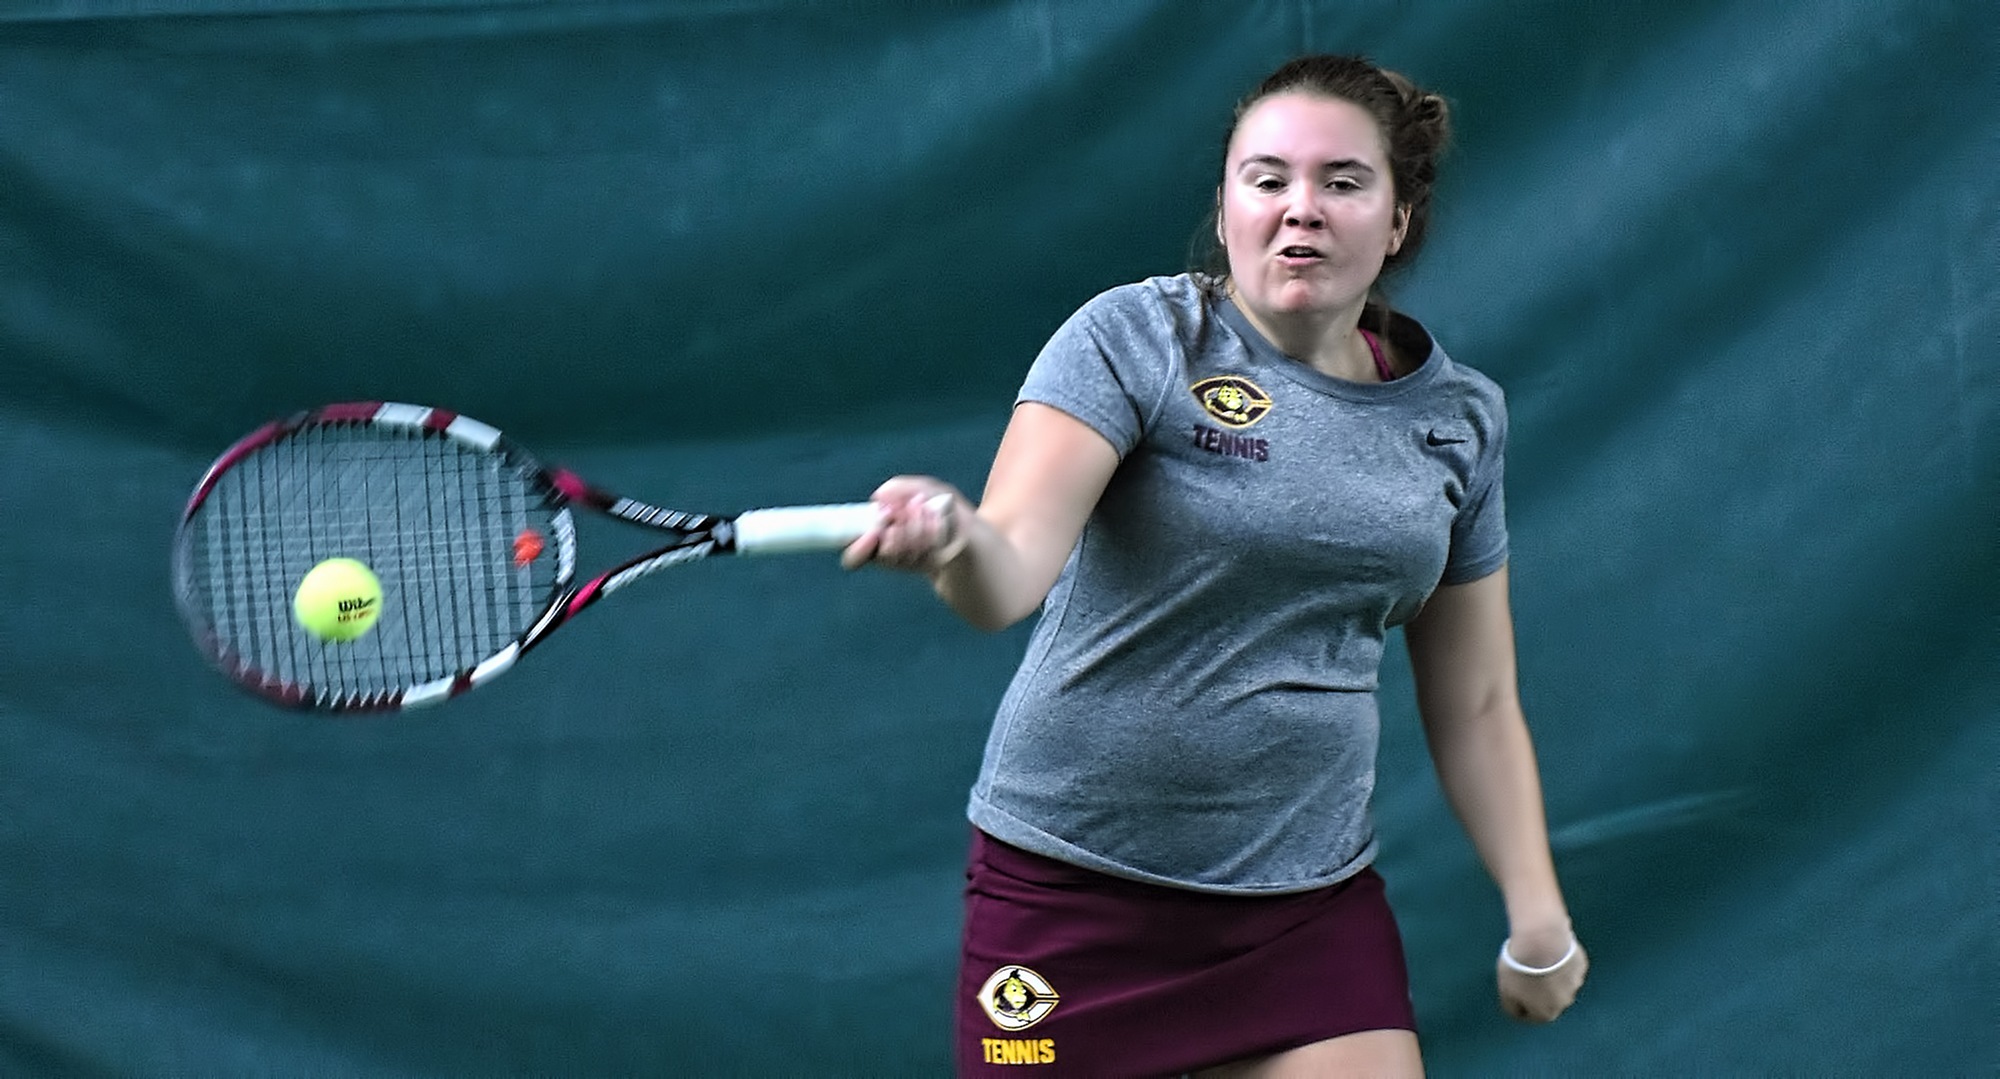 Sophomore Lexi Johnson earned her first conference singles win of the year with a 7-5, 6-2 victory at No.4 singles.